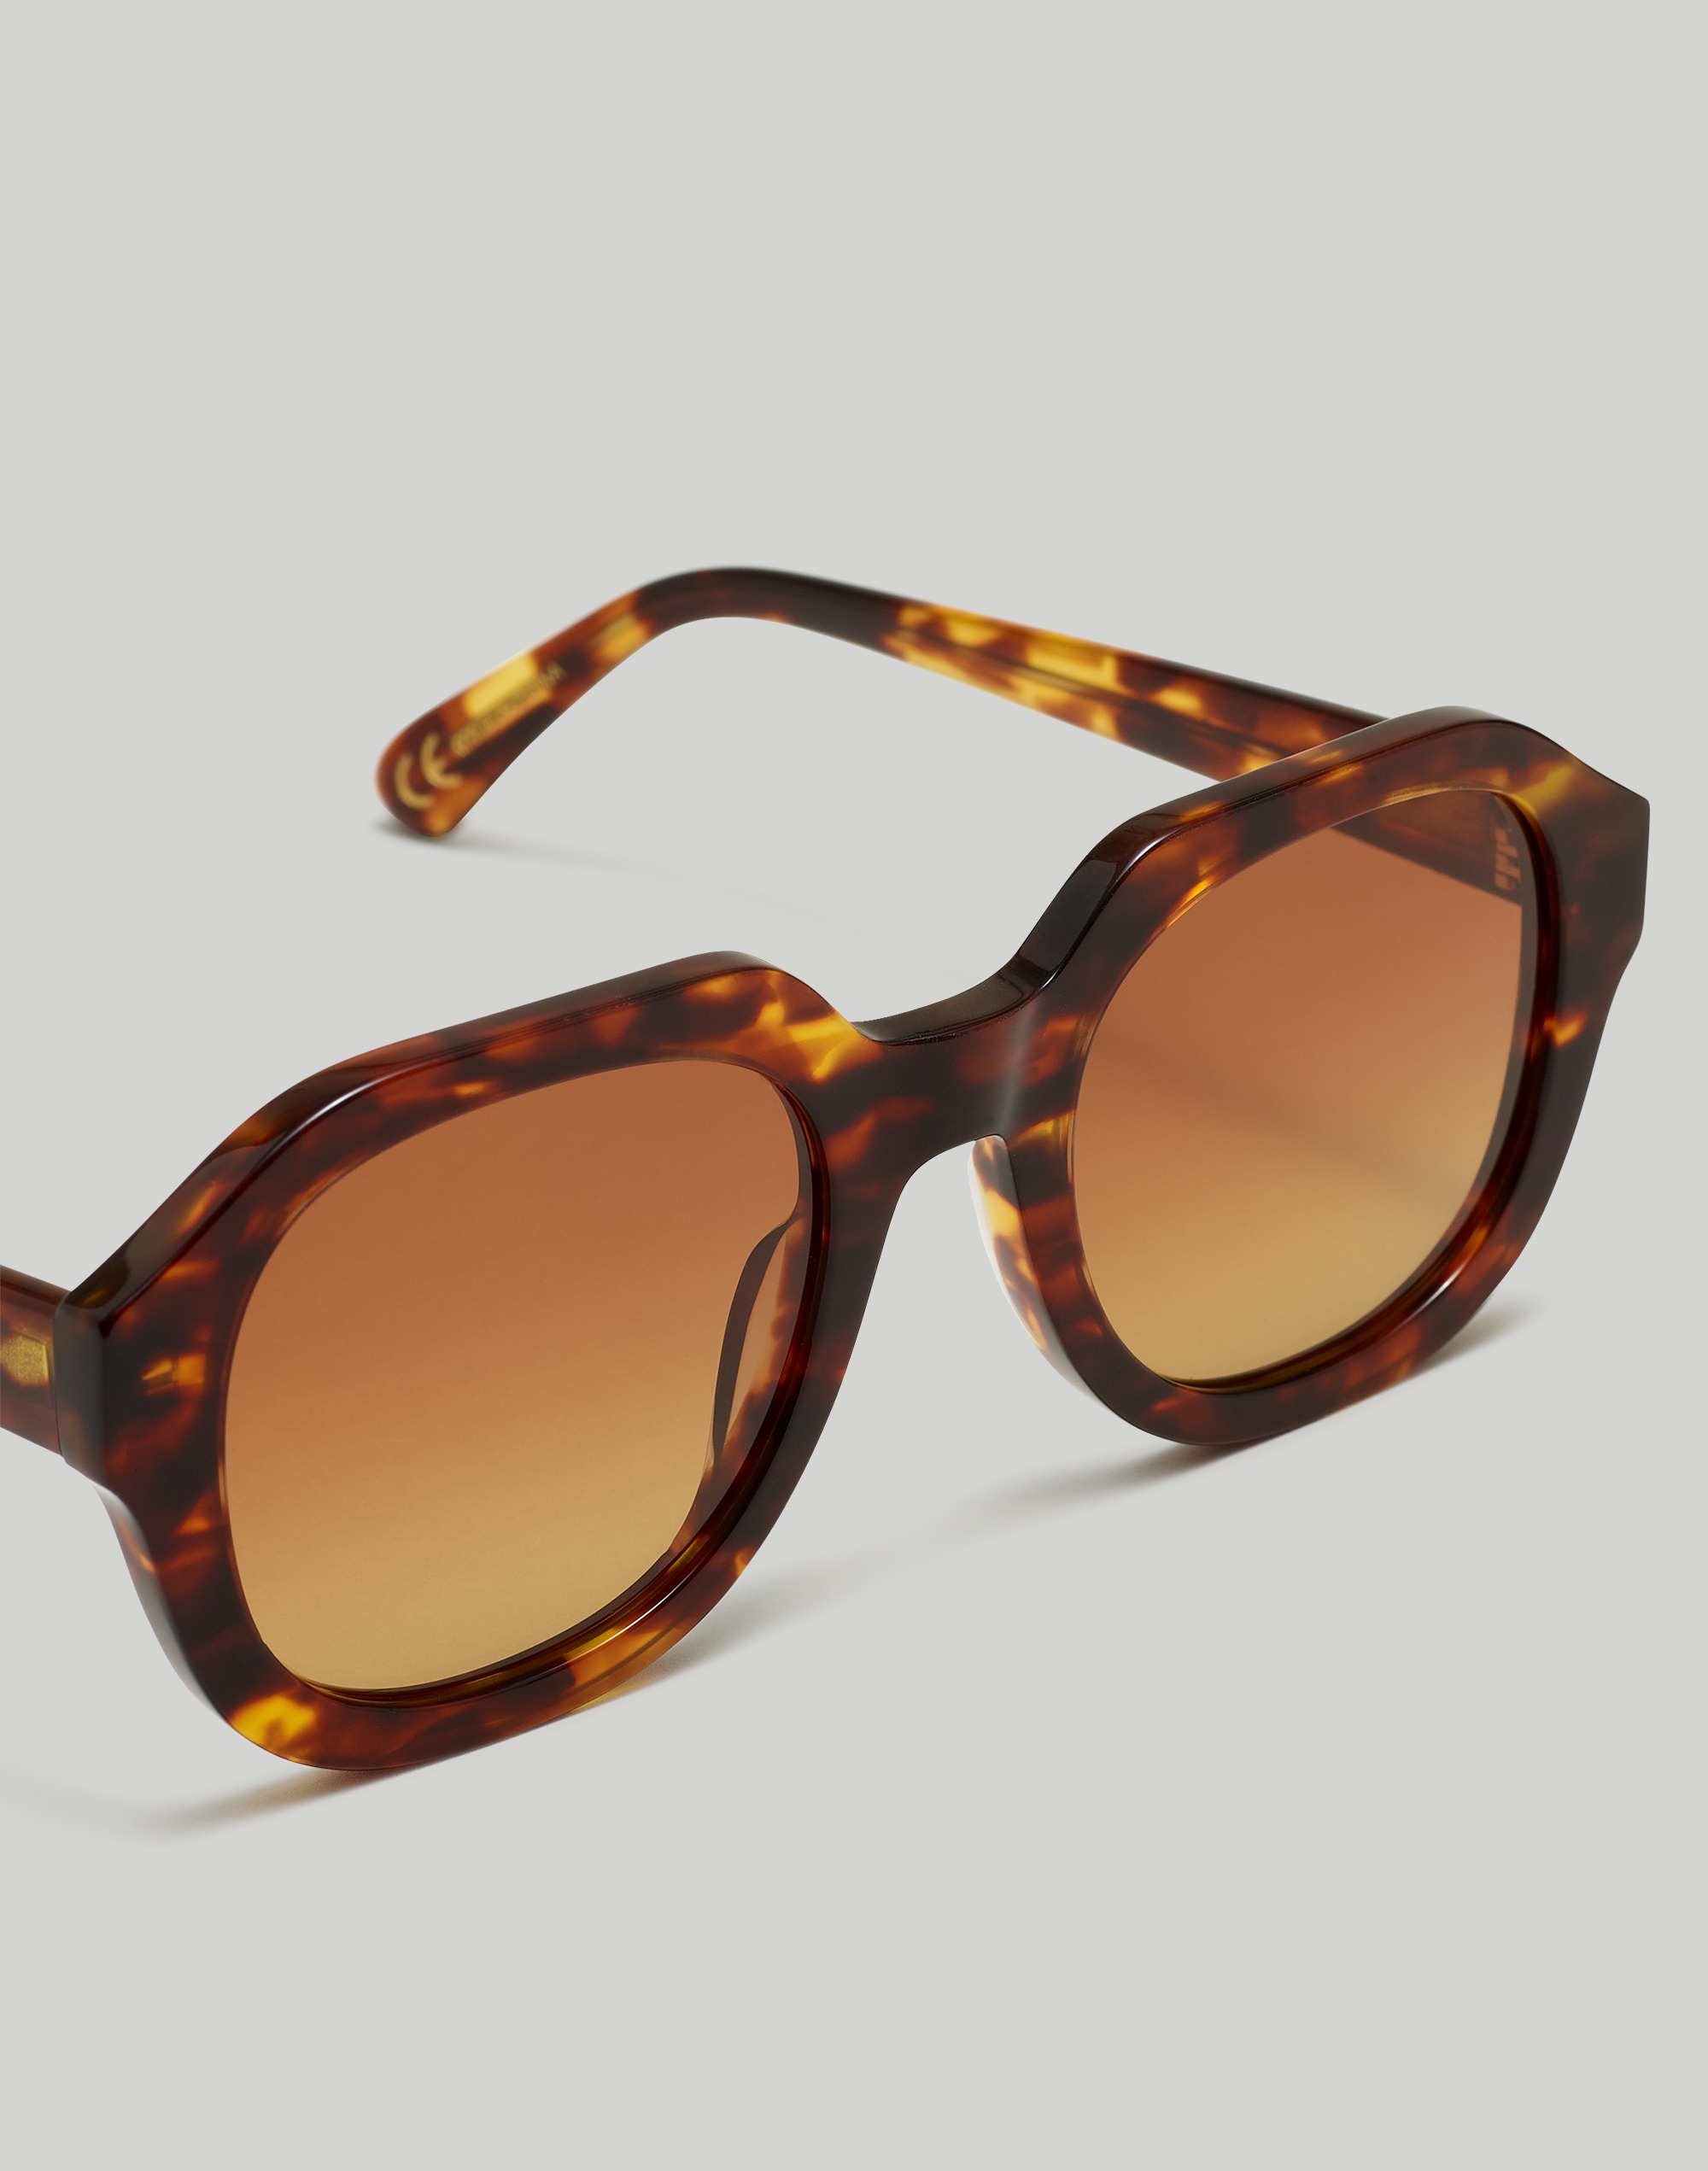 Shop Mw Ralston Sunglasses In Whisky Tort